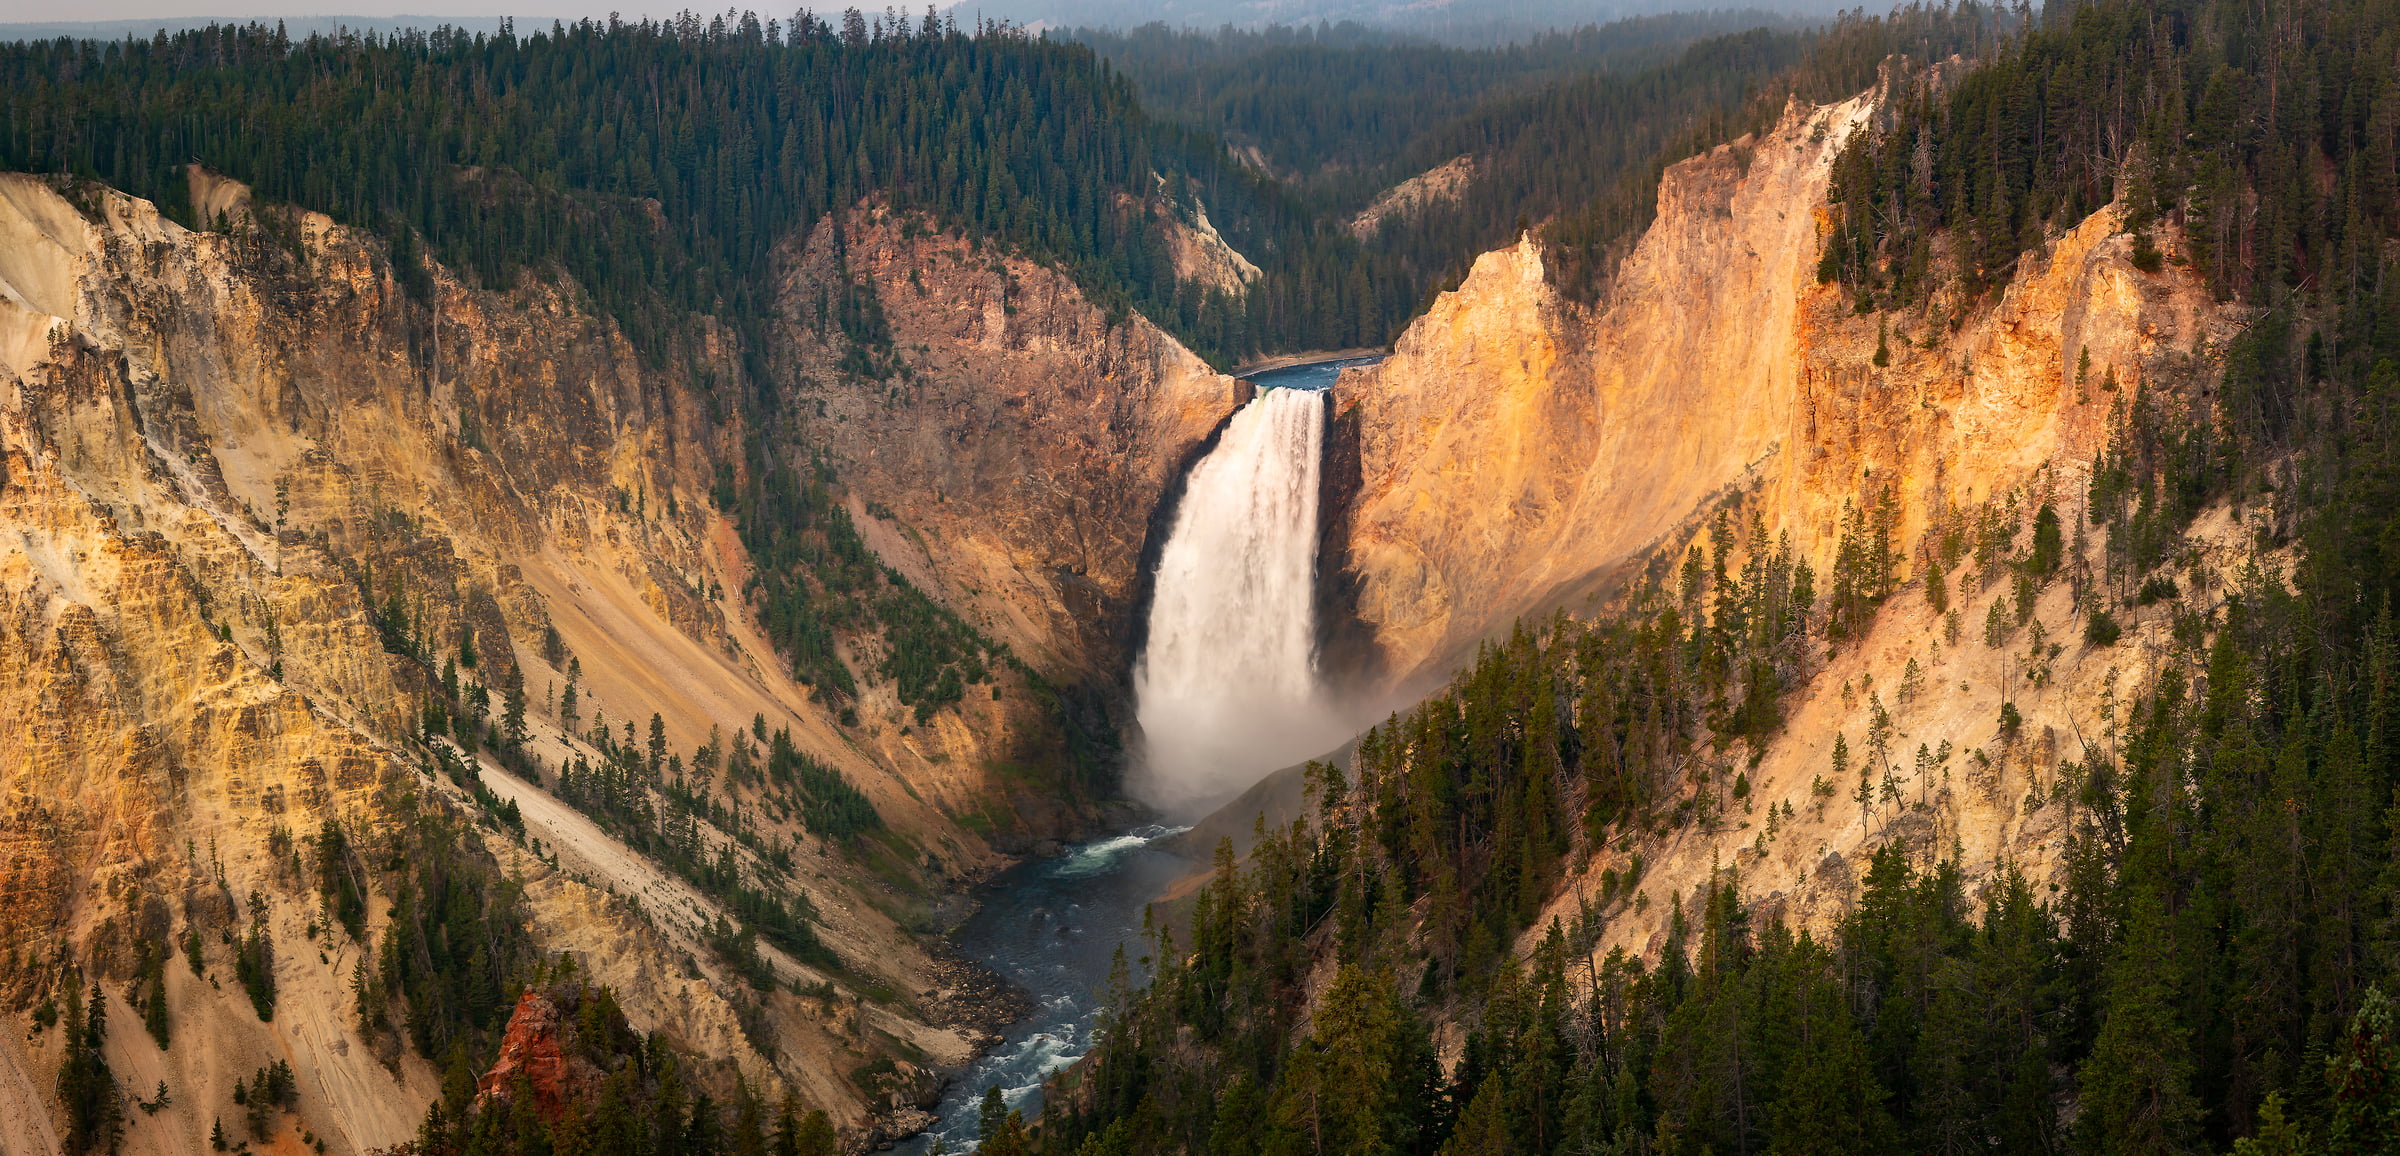 211 megapixels! A very high resolution, large-format VAST photo print of the Grand Canyon of the Yellowstone with the lower falls; landscape photograph created by Phillip Noll in Yellowstone National Park, WY